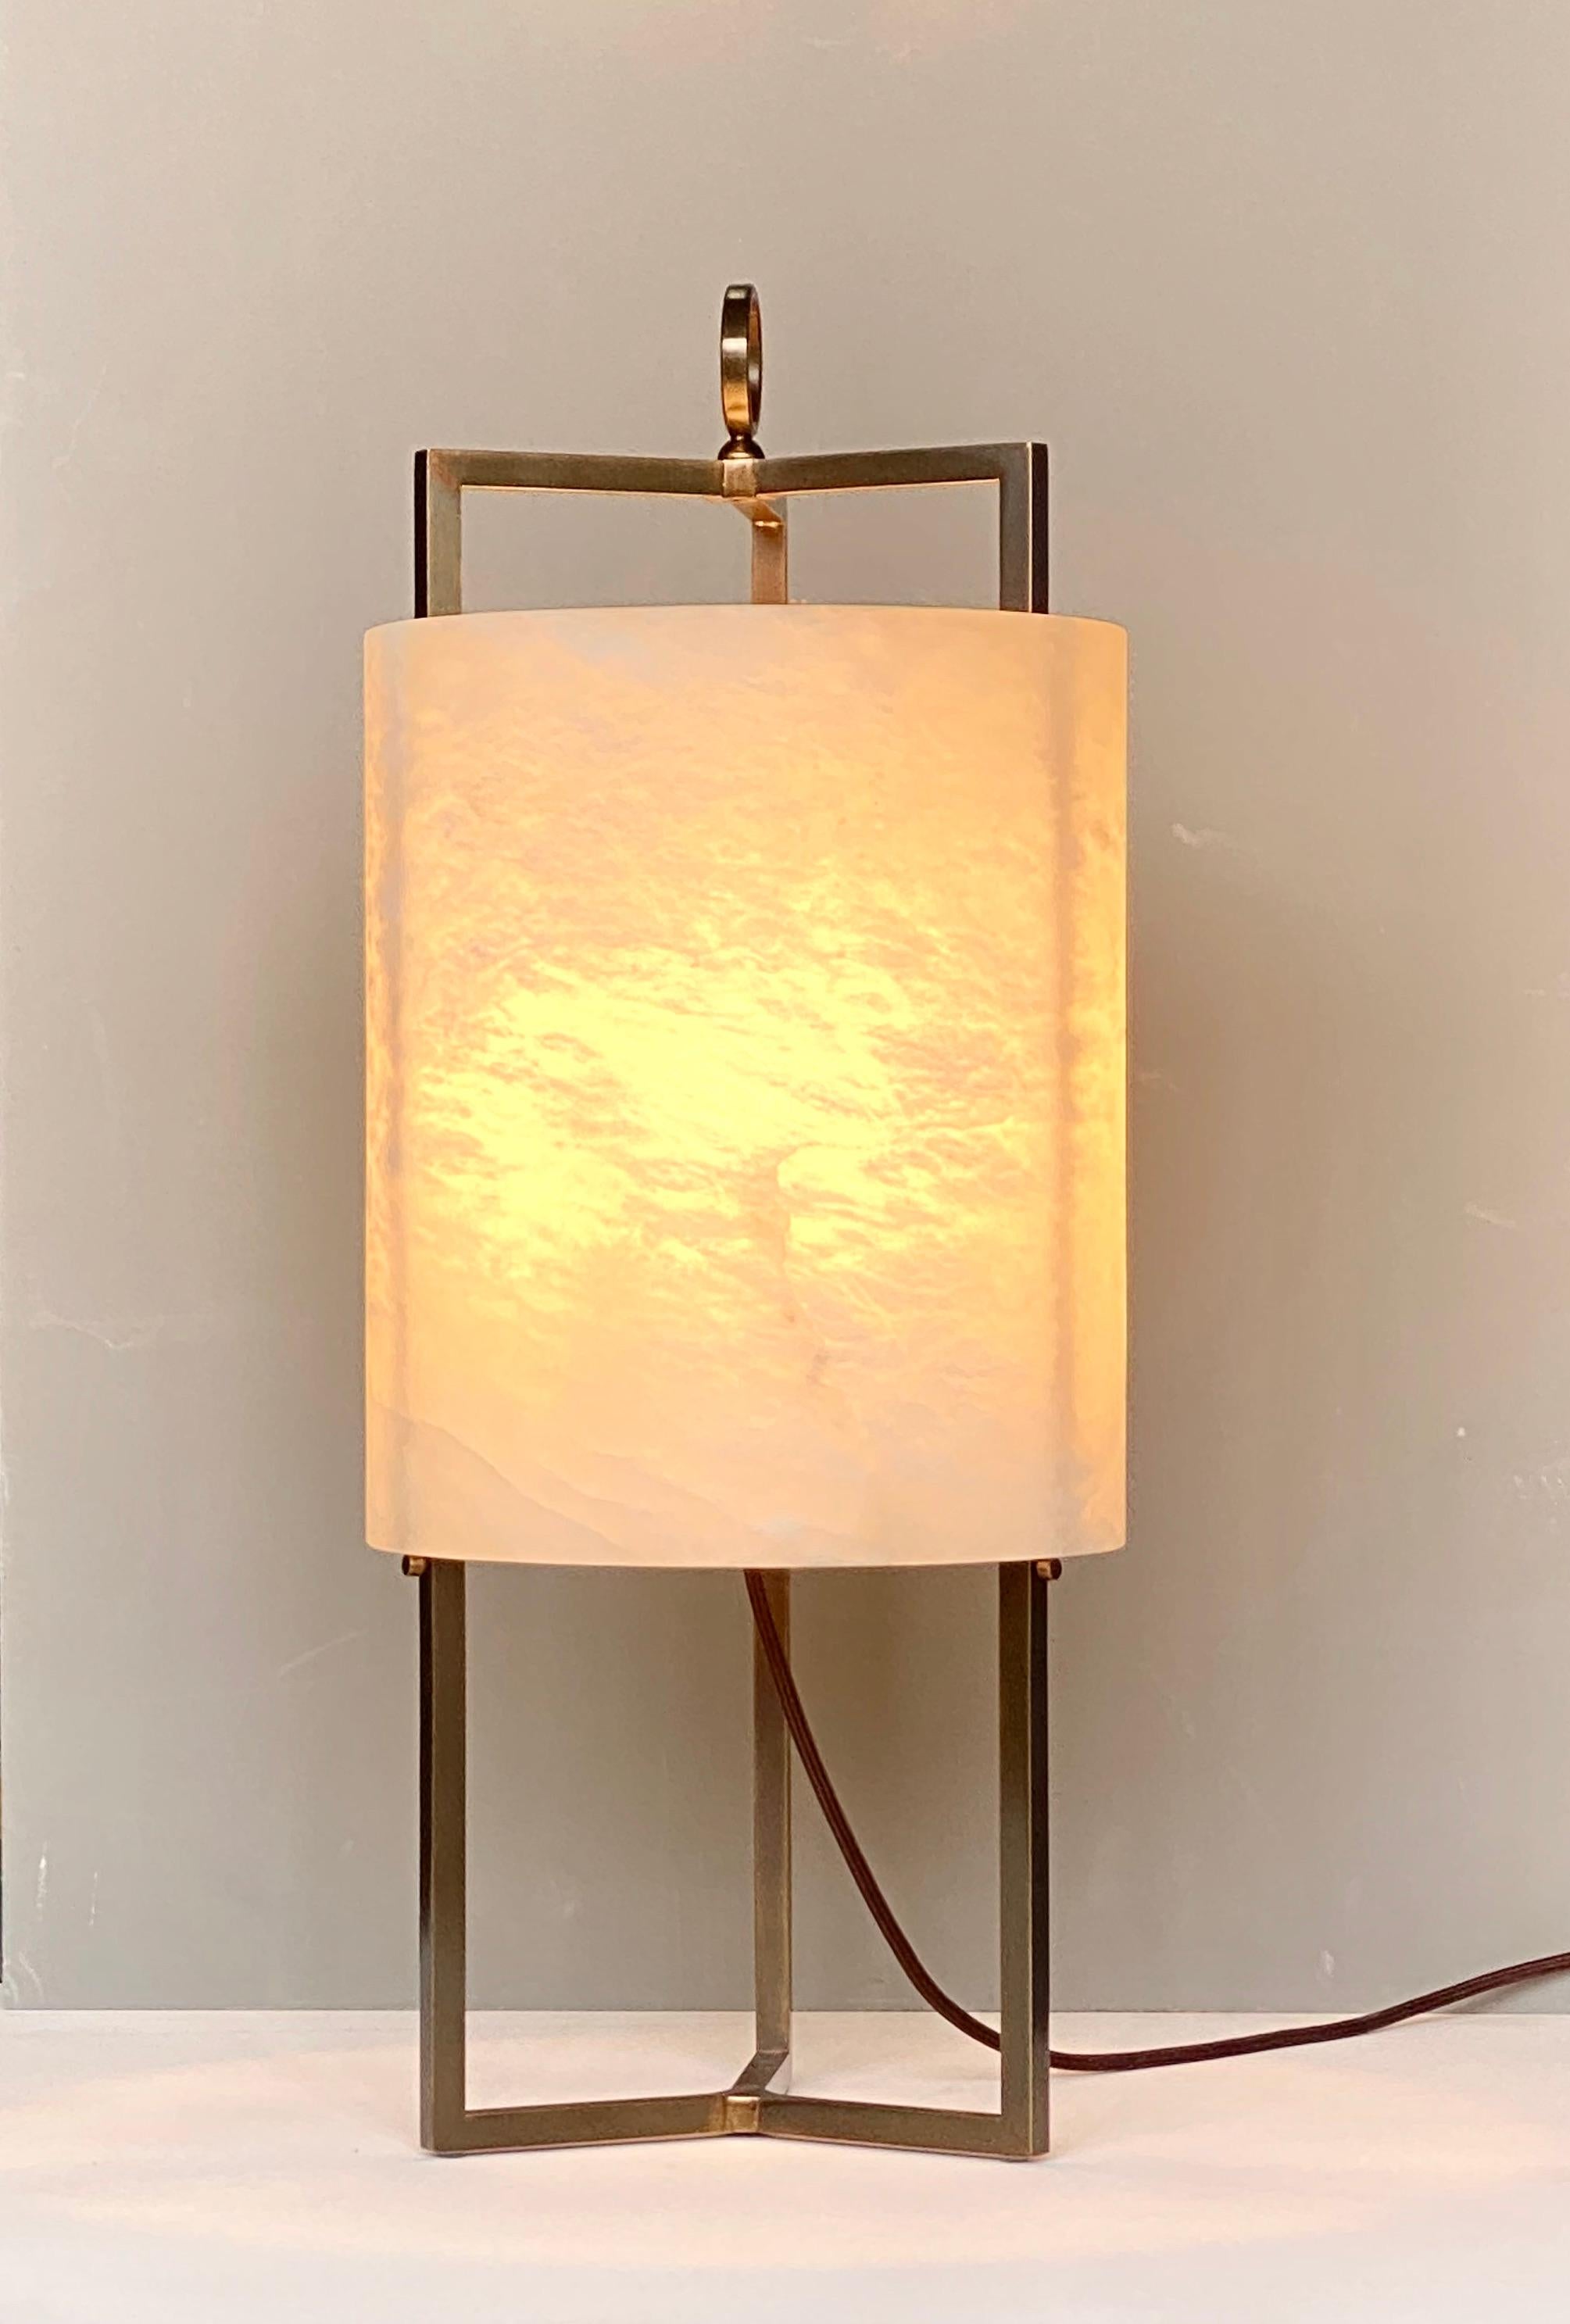 The reinterpretation of the classic lantern that you describe is a beautiful and unique design. The use of a three-stemmed brass structure to support the cylindrical lampshade made from a solid alabaster block creates an interesting contrast between